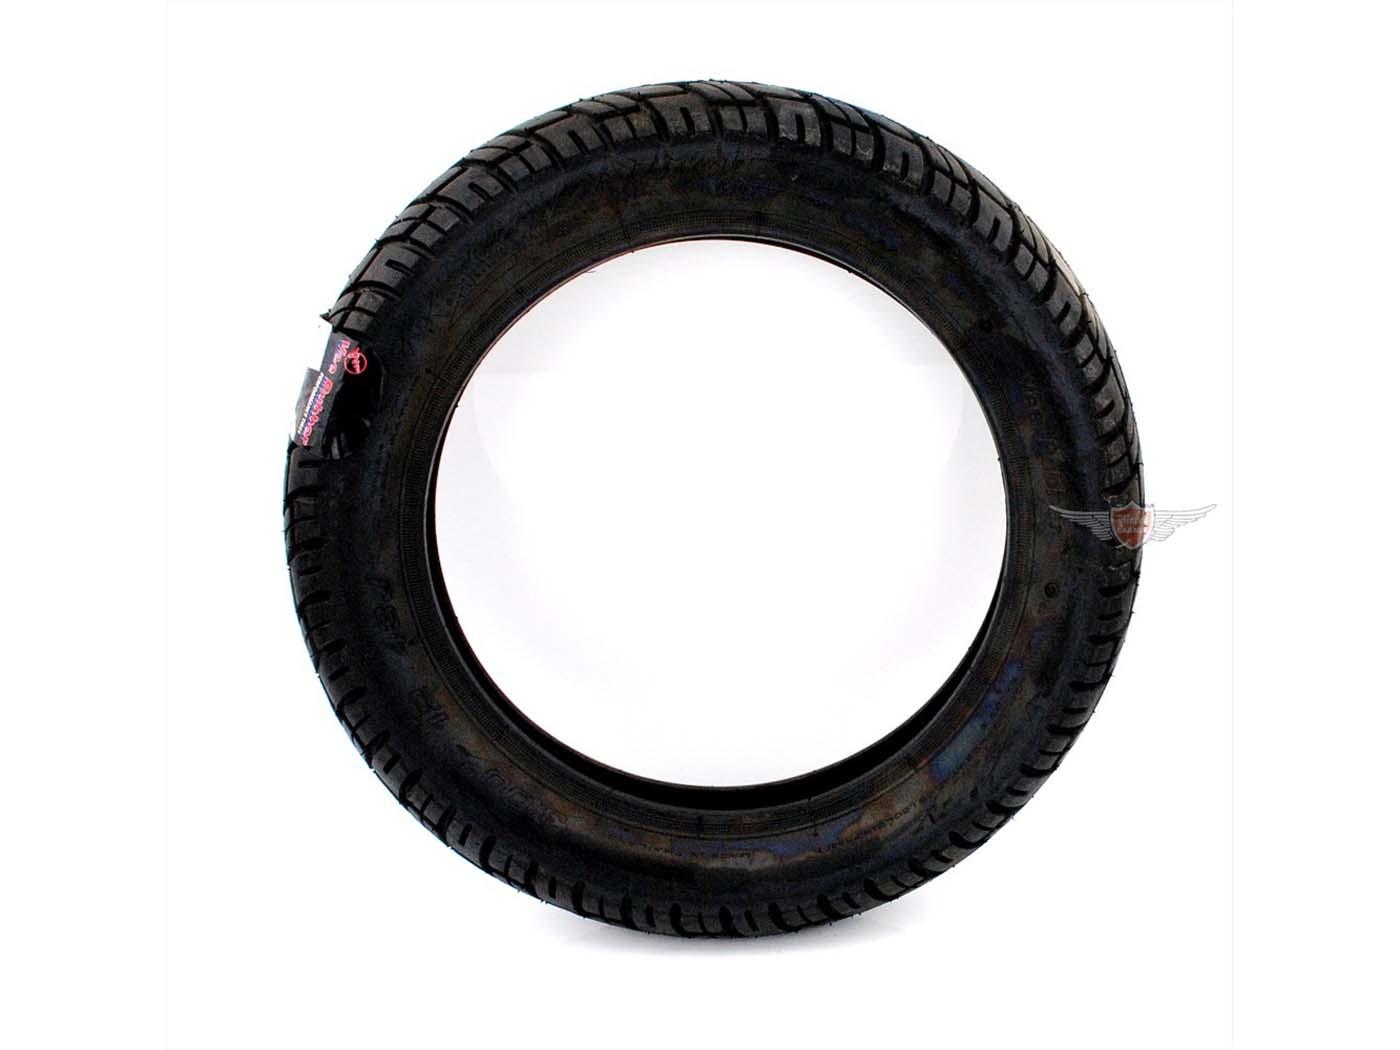 Tires 3.00 X 12 Inch Touring VRM 094